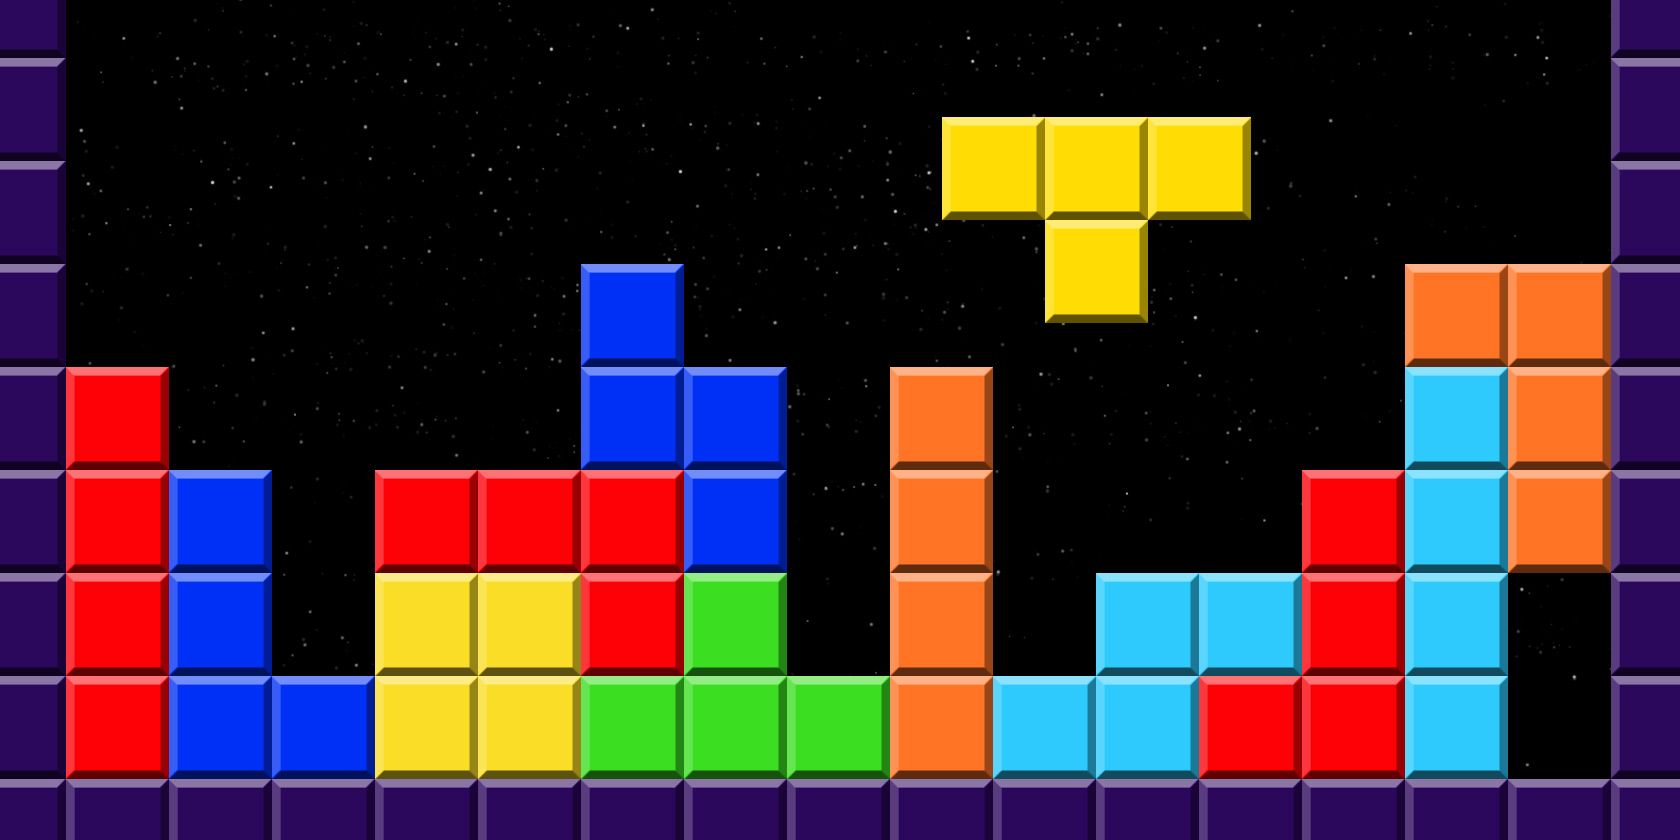 30 Years Of Tetris: A History Of The World's Most Beloved Puzzle Game